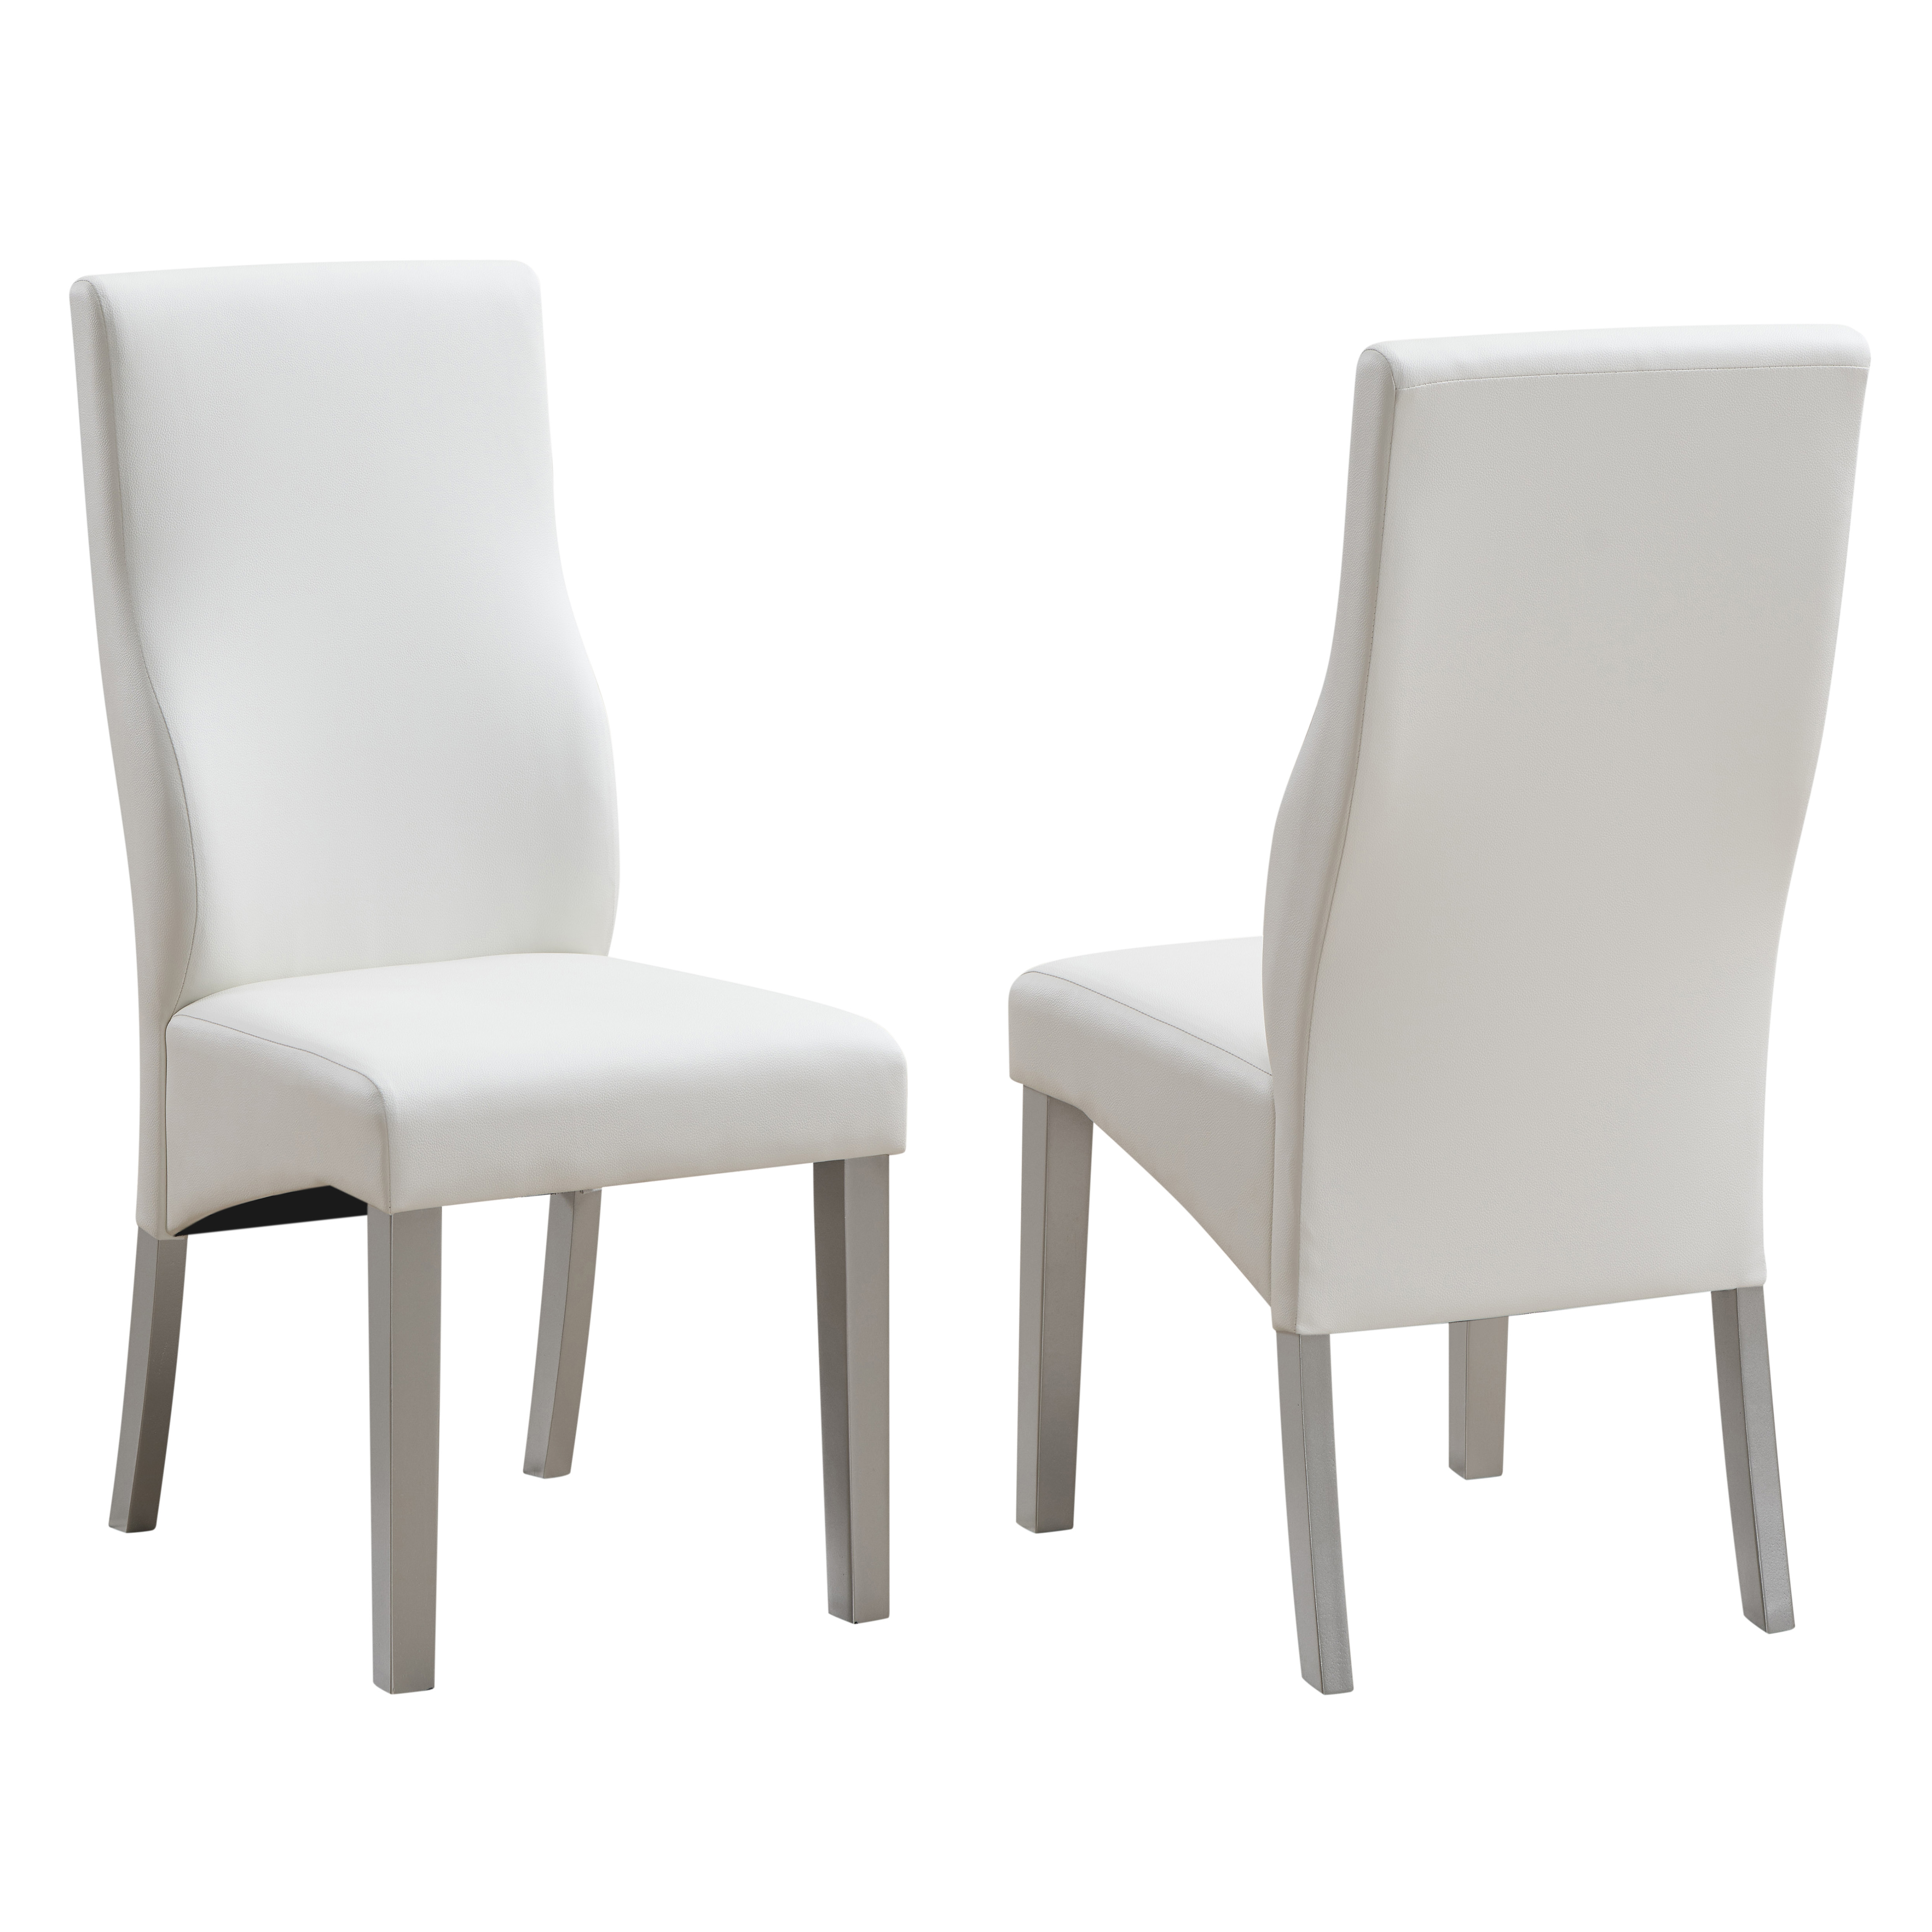 Kane Dining Chairs - Set of 2